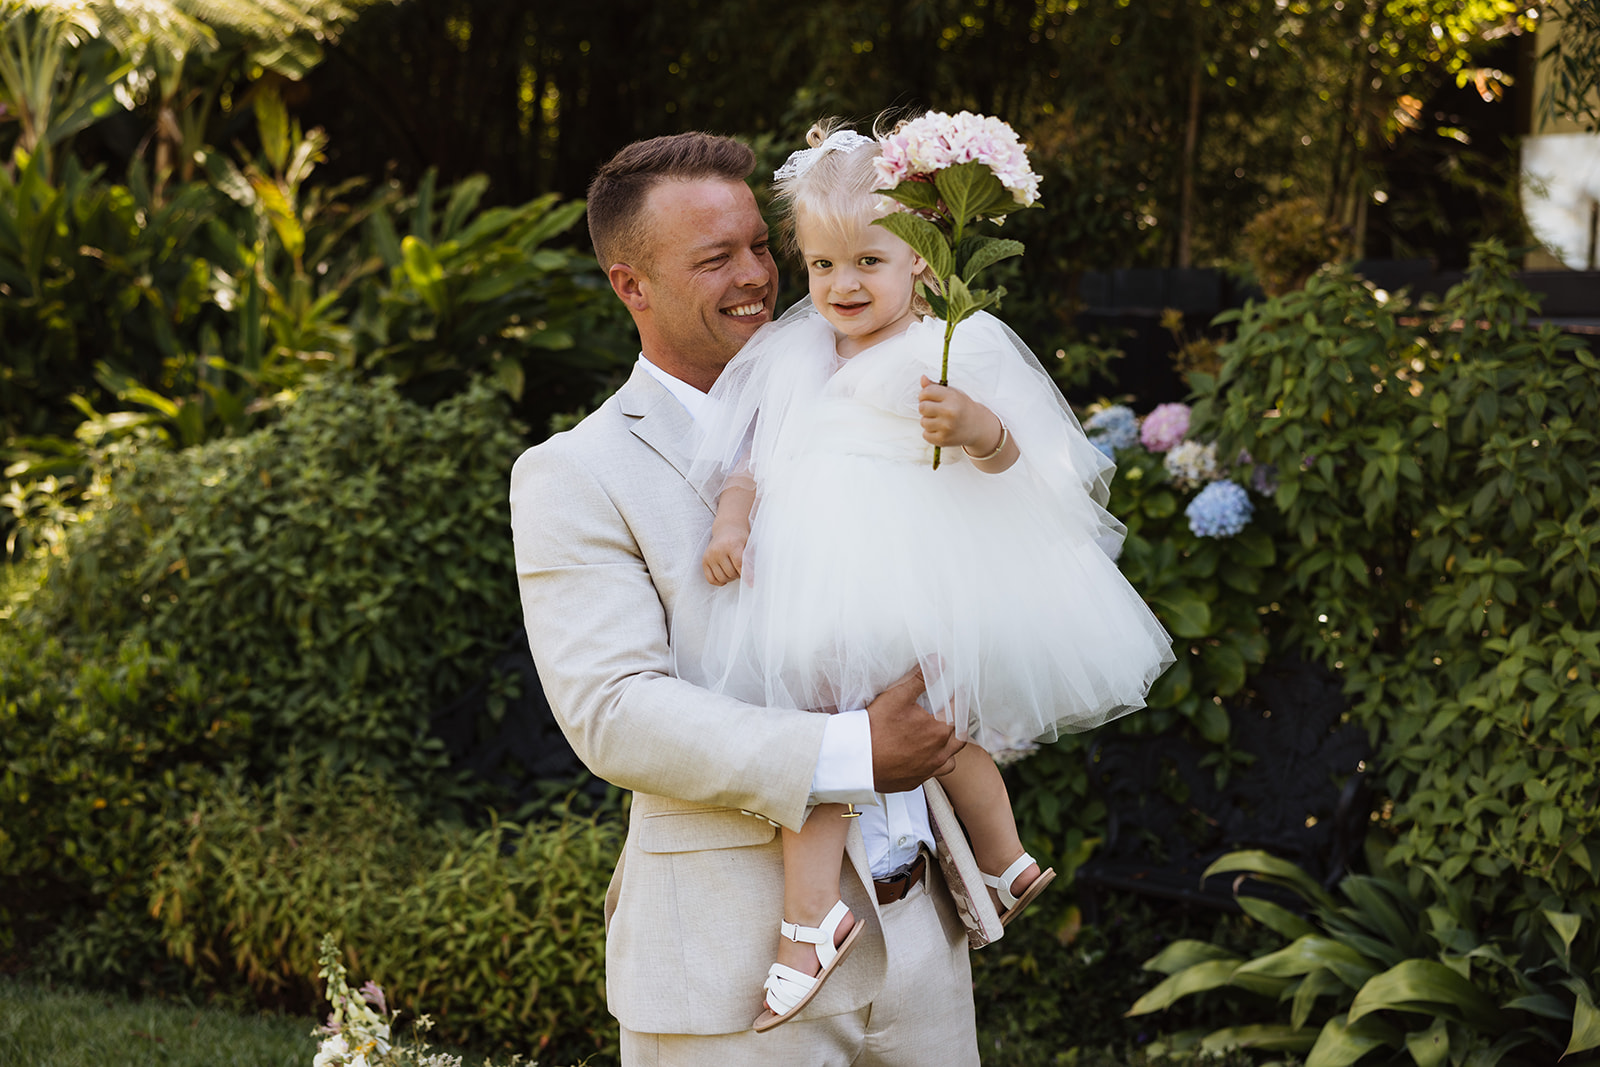 Groom with his daughter at the Wedding in Lindesay House, Darling Point New South Wales